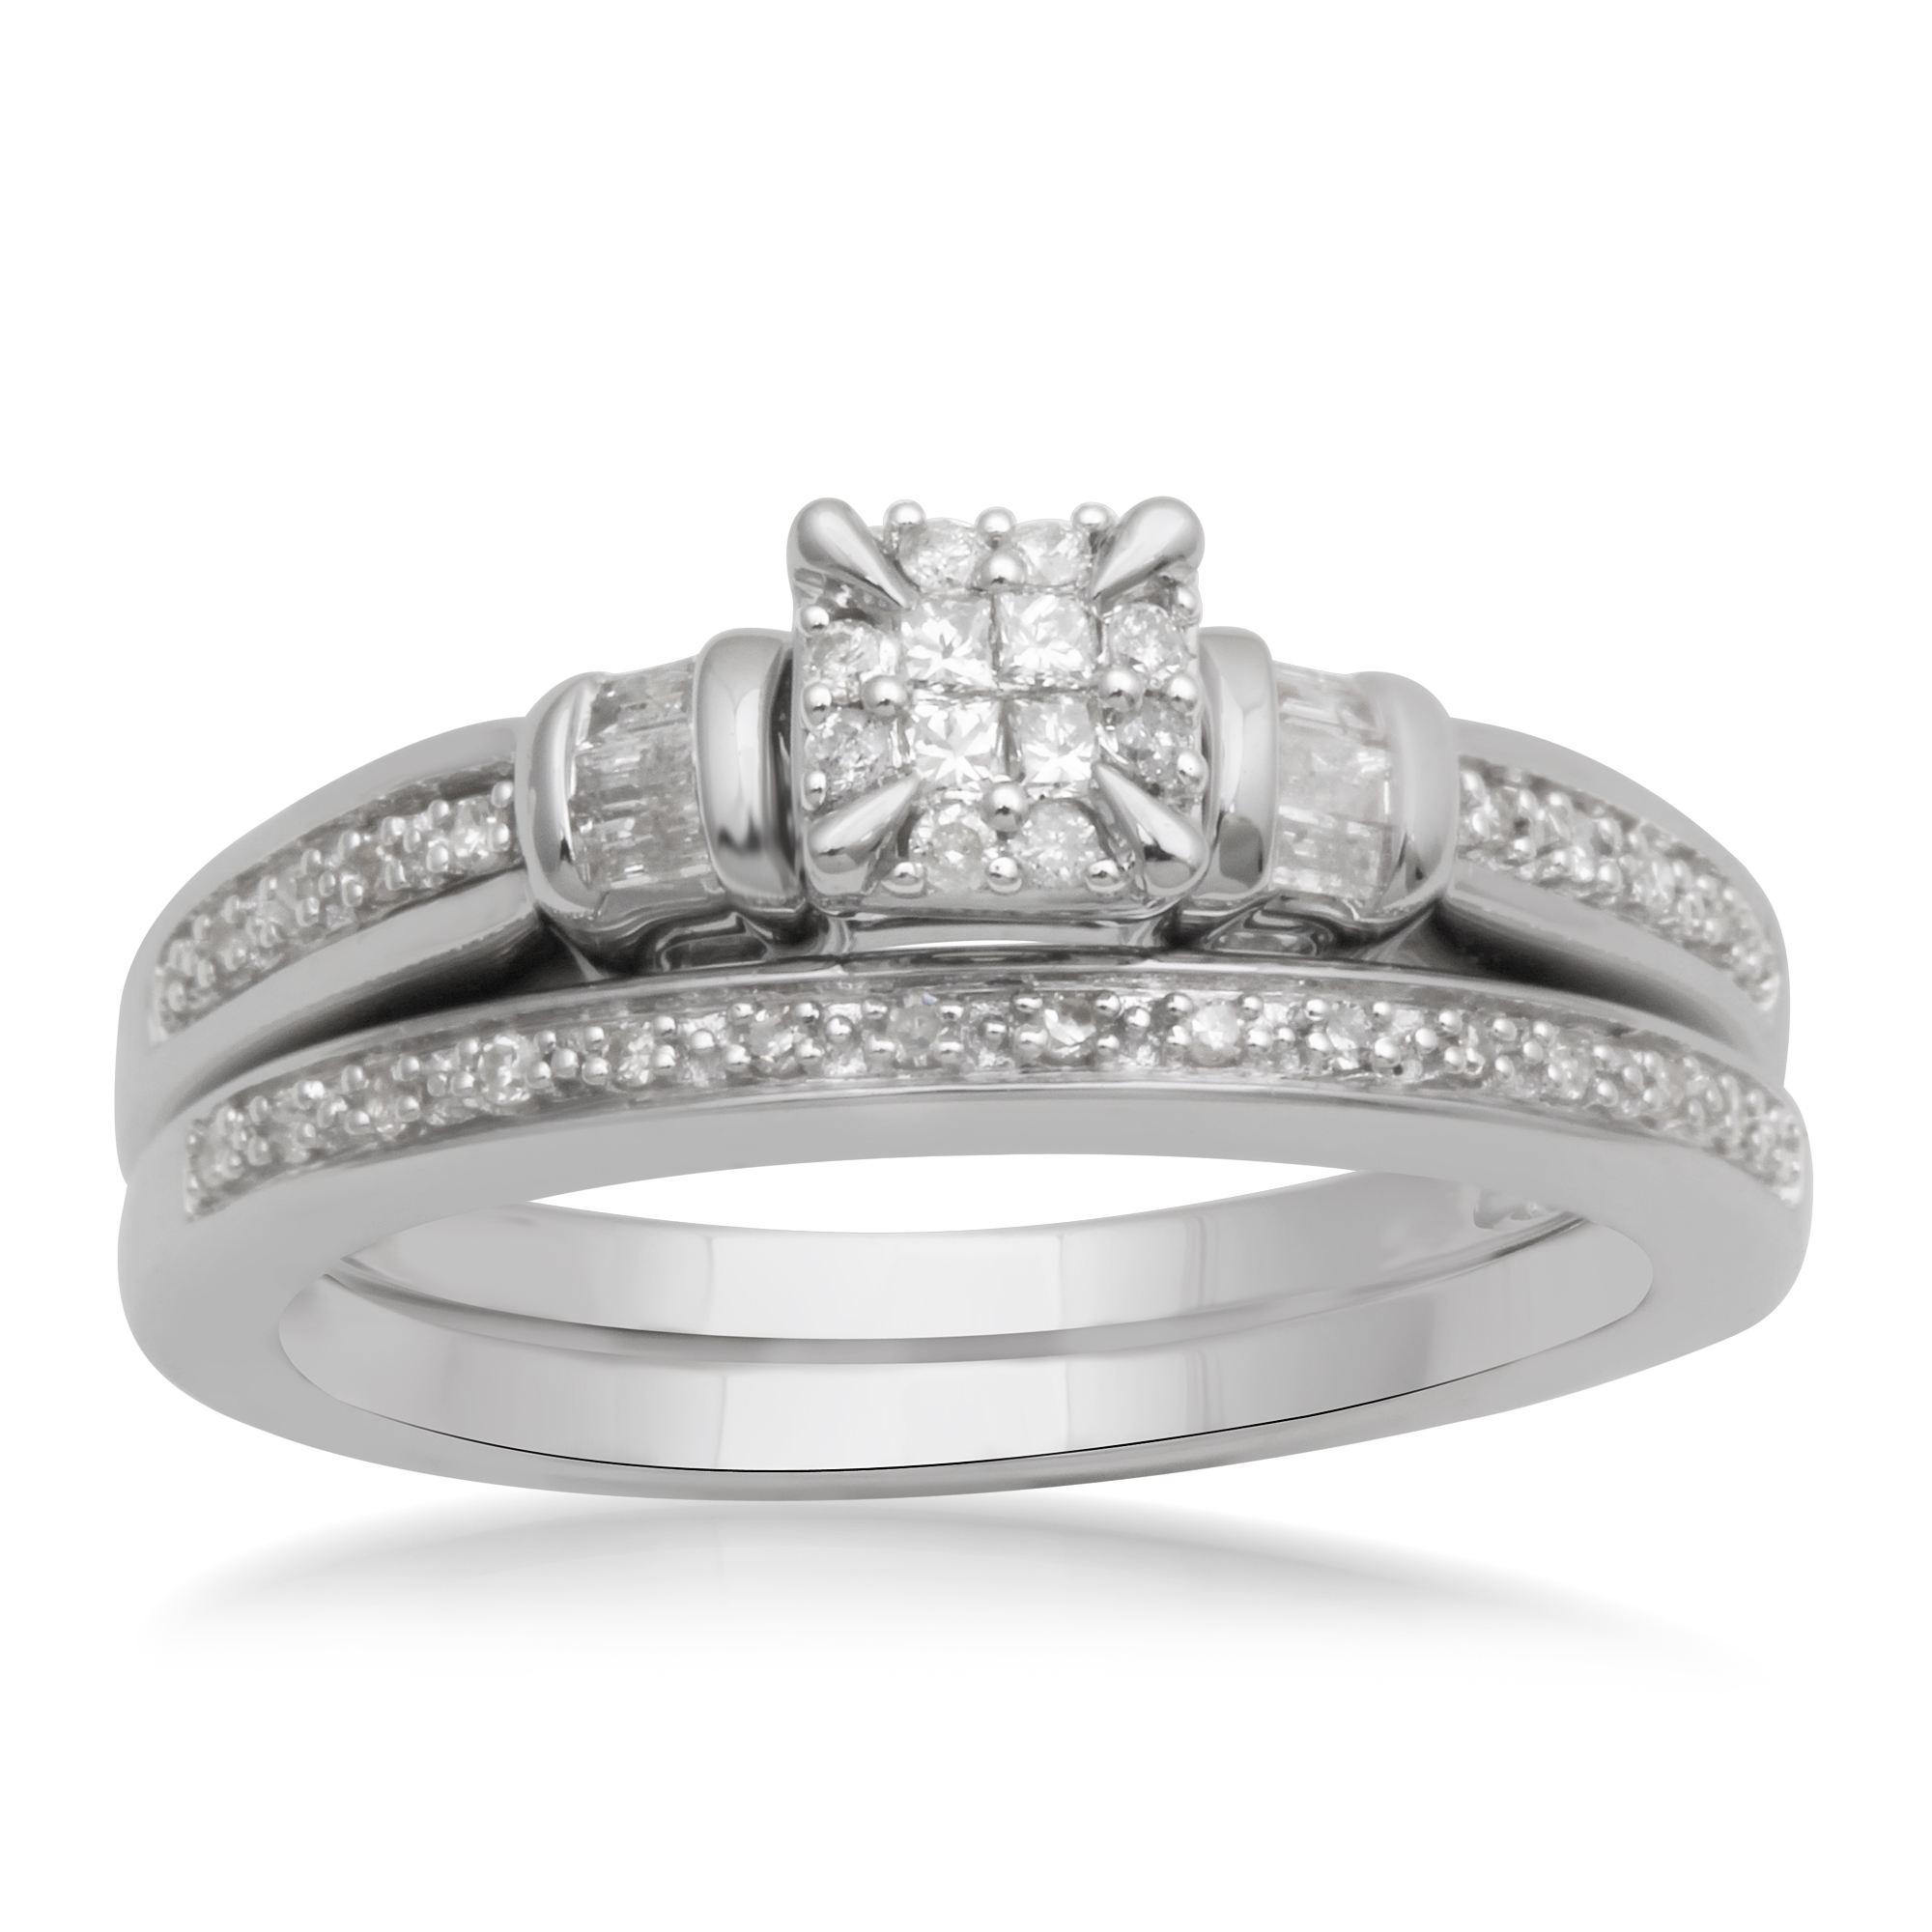 1/4 CTTW Sterling Silver Diamond Ring